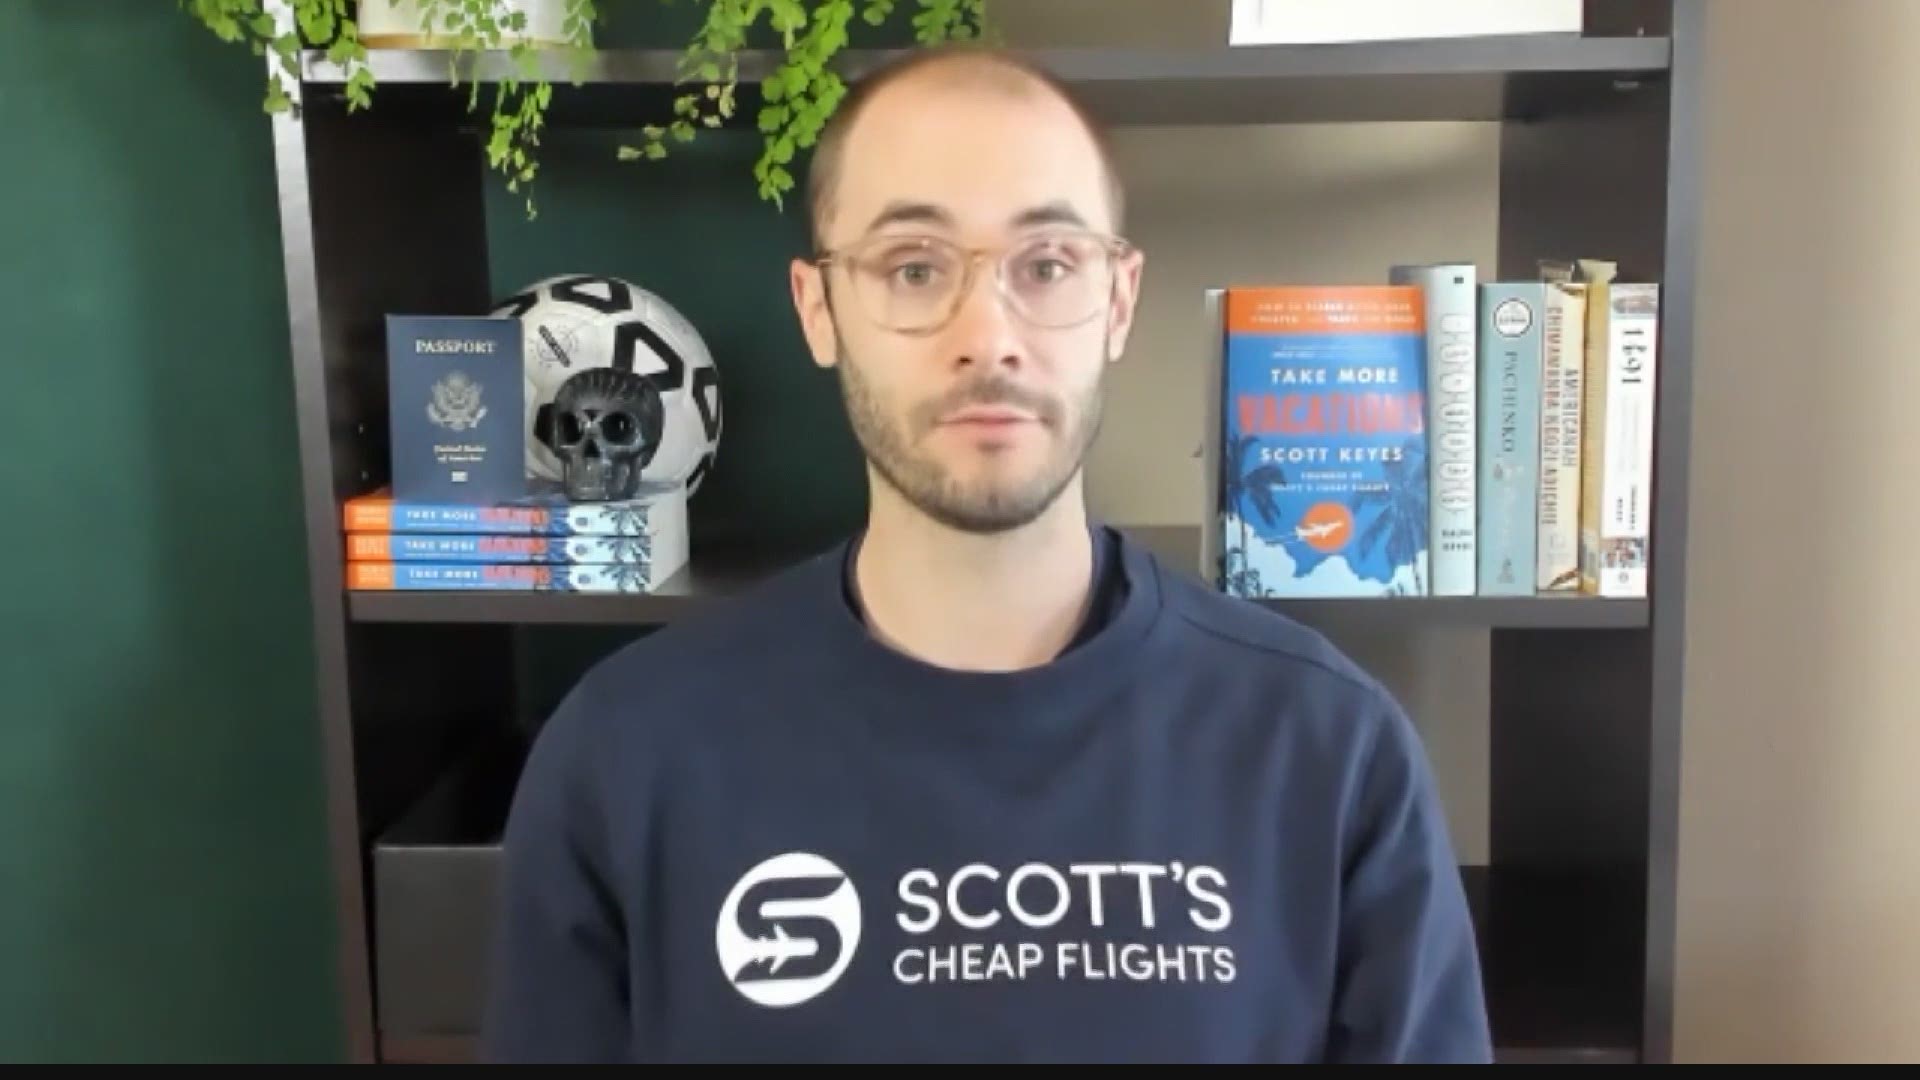 Airlines may not automatically offer a refund.